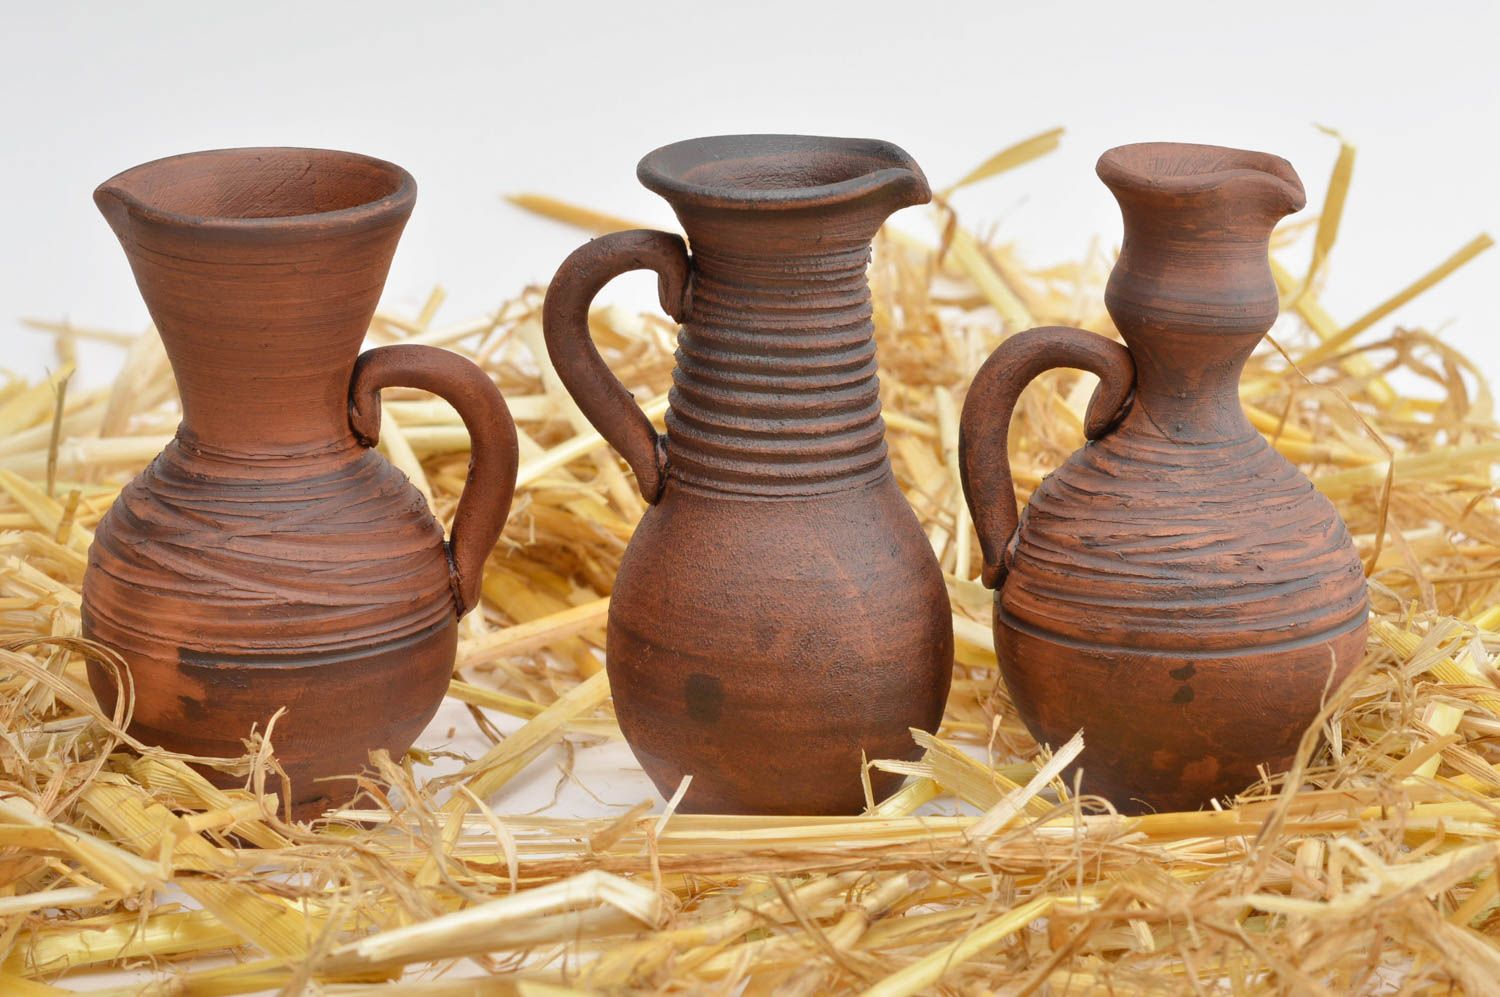 Set of 3 wine brown pitchers in different design with handles and simple patterns 0,5 lb photo 1